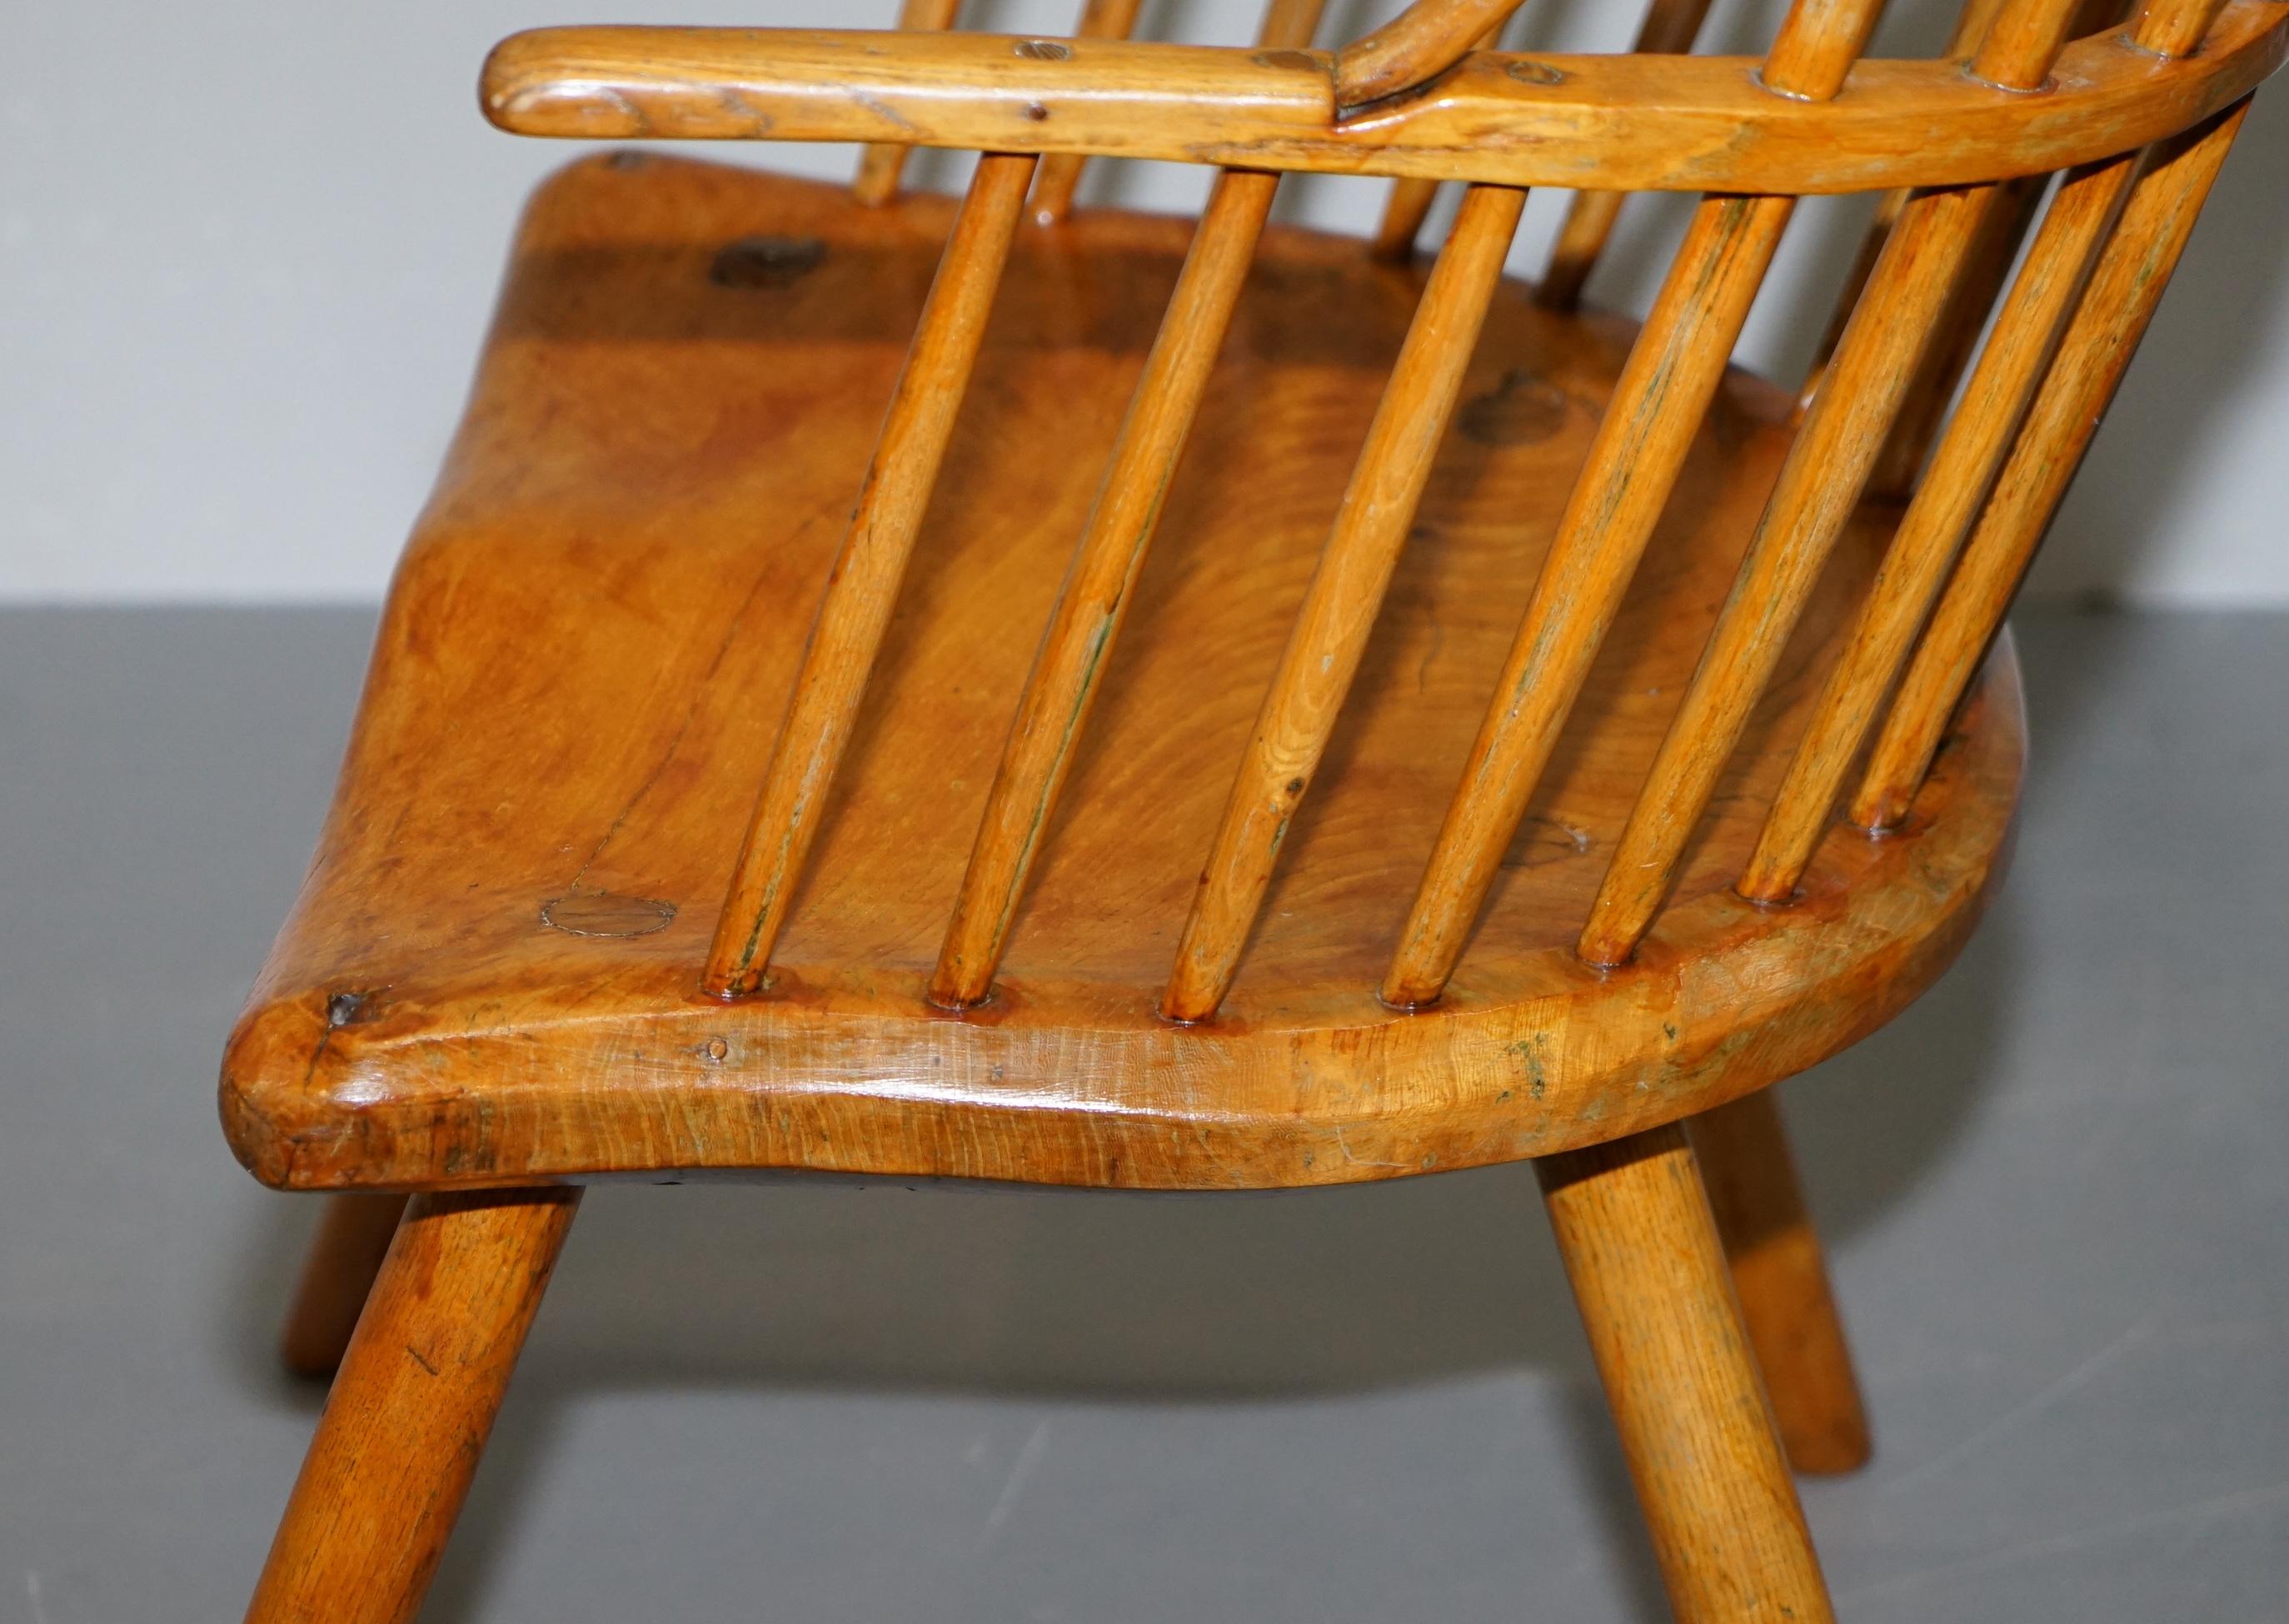 Stunning 18th Century Yew Wood Windsor Armchair Primate Design Stick Back For Sale 10